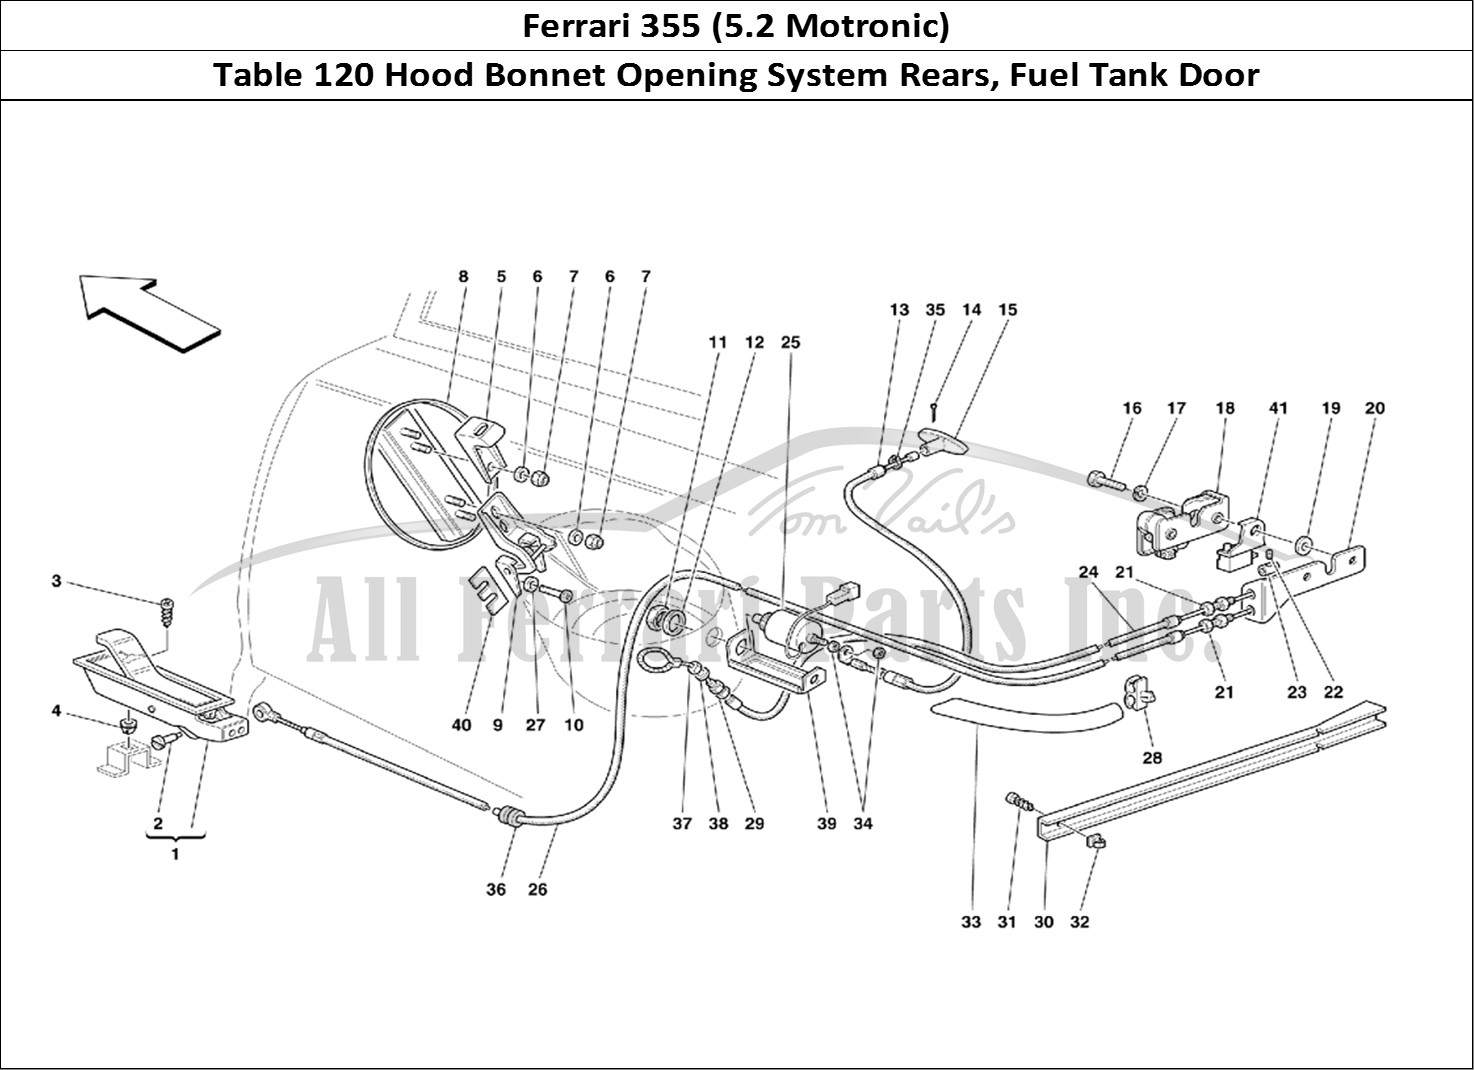 Ferrari Parts Ferrari 355 (5.2 Motronic) Page 120 Opening Devices for Rear